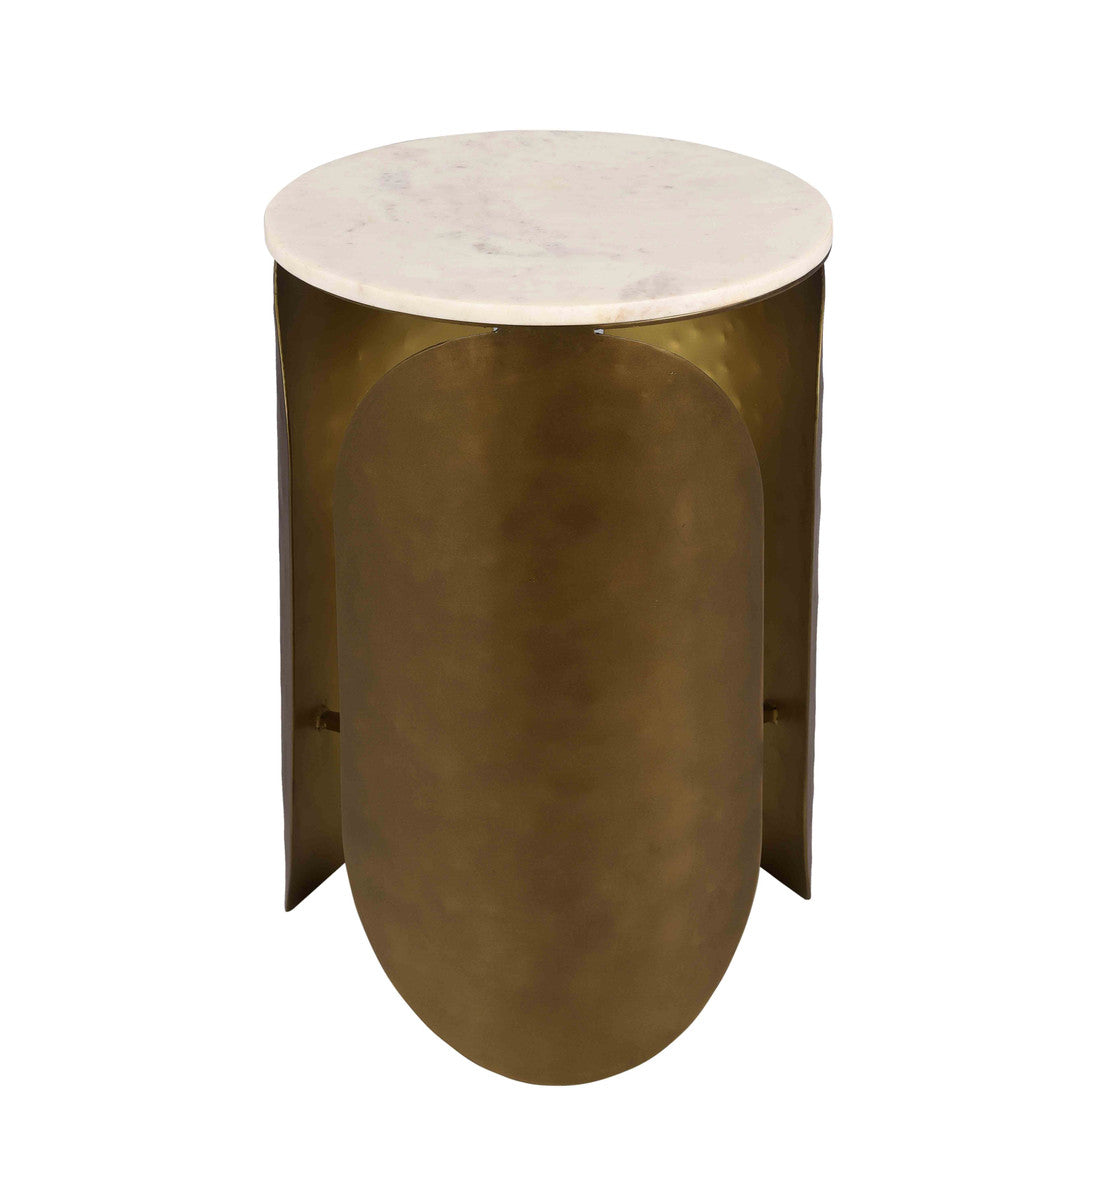 Load image into Gallery viewer, Indio Side Table Side Table TOV Furniture     Four Hands, Burke Decor, Mid Century Modern Furniture, Old Bones Furniture Company, Old Bones Co, Modern Mid Century, Designer Furniture, https://www.oldbonesco.com/
